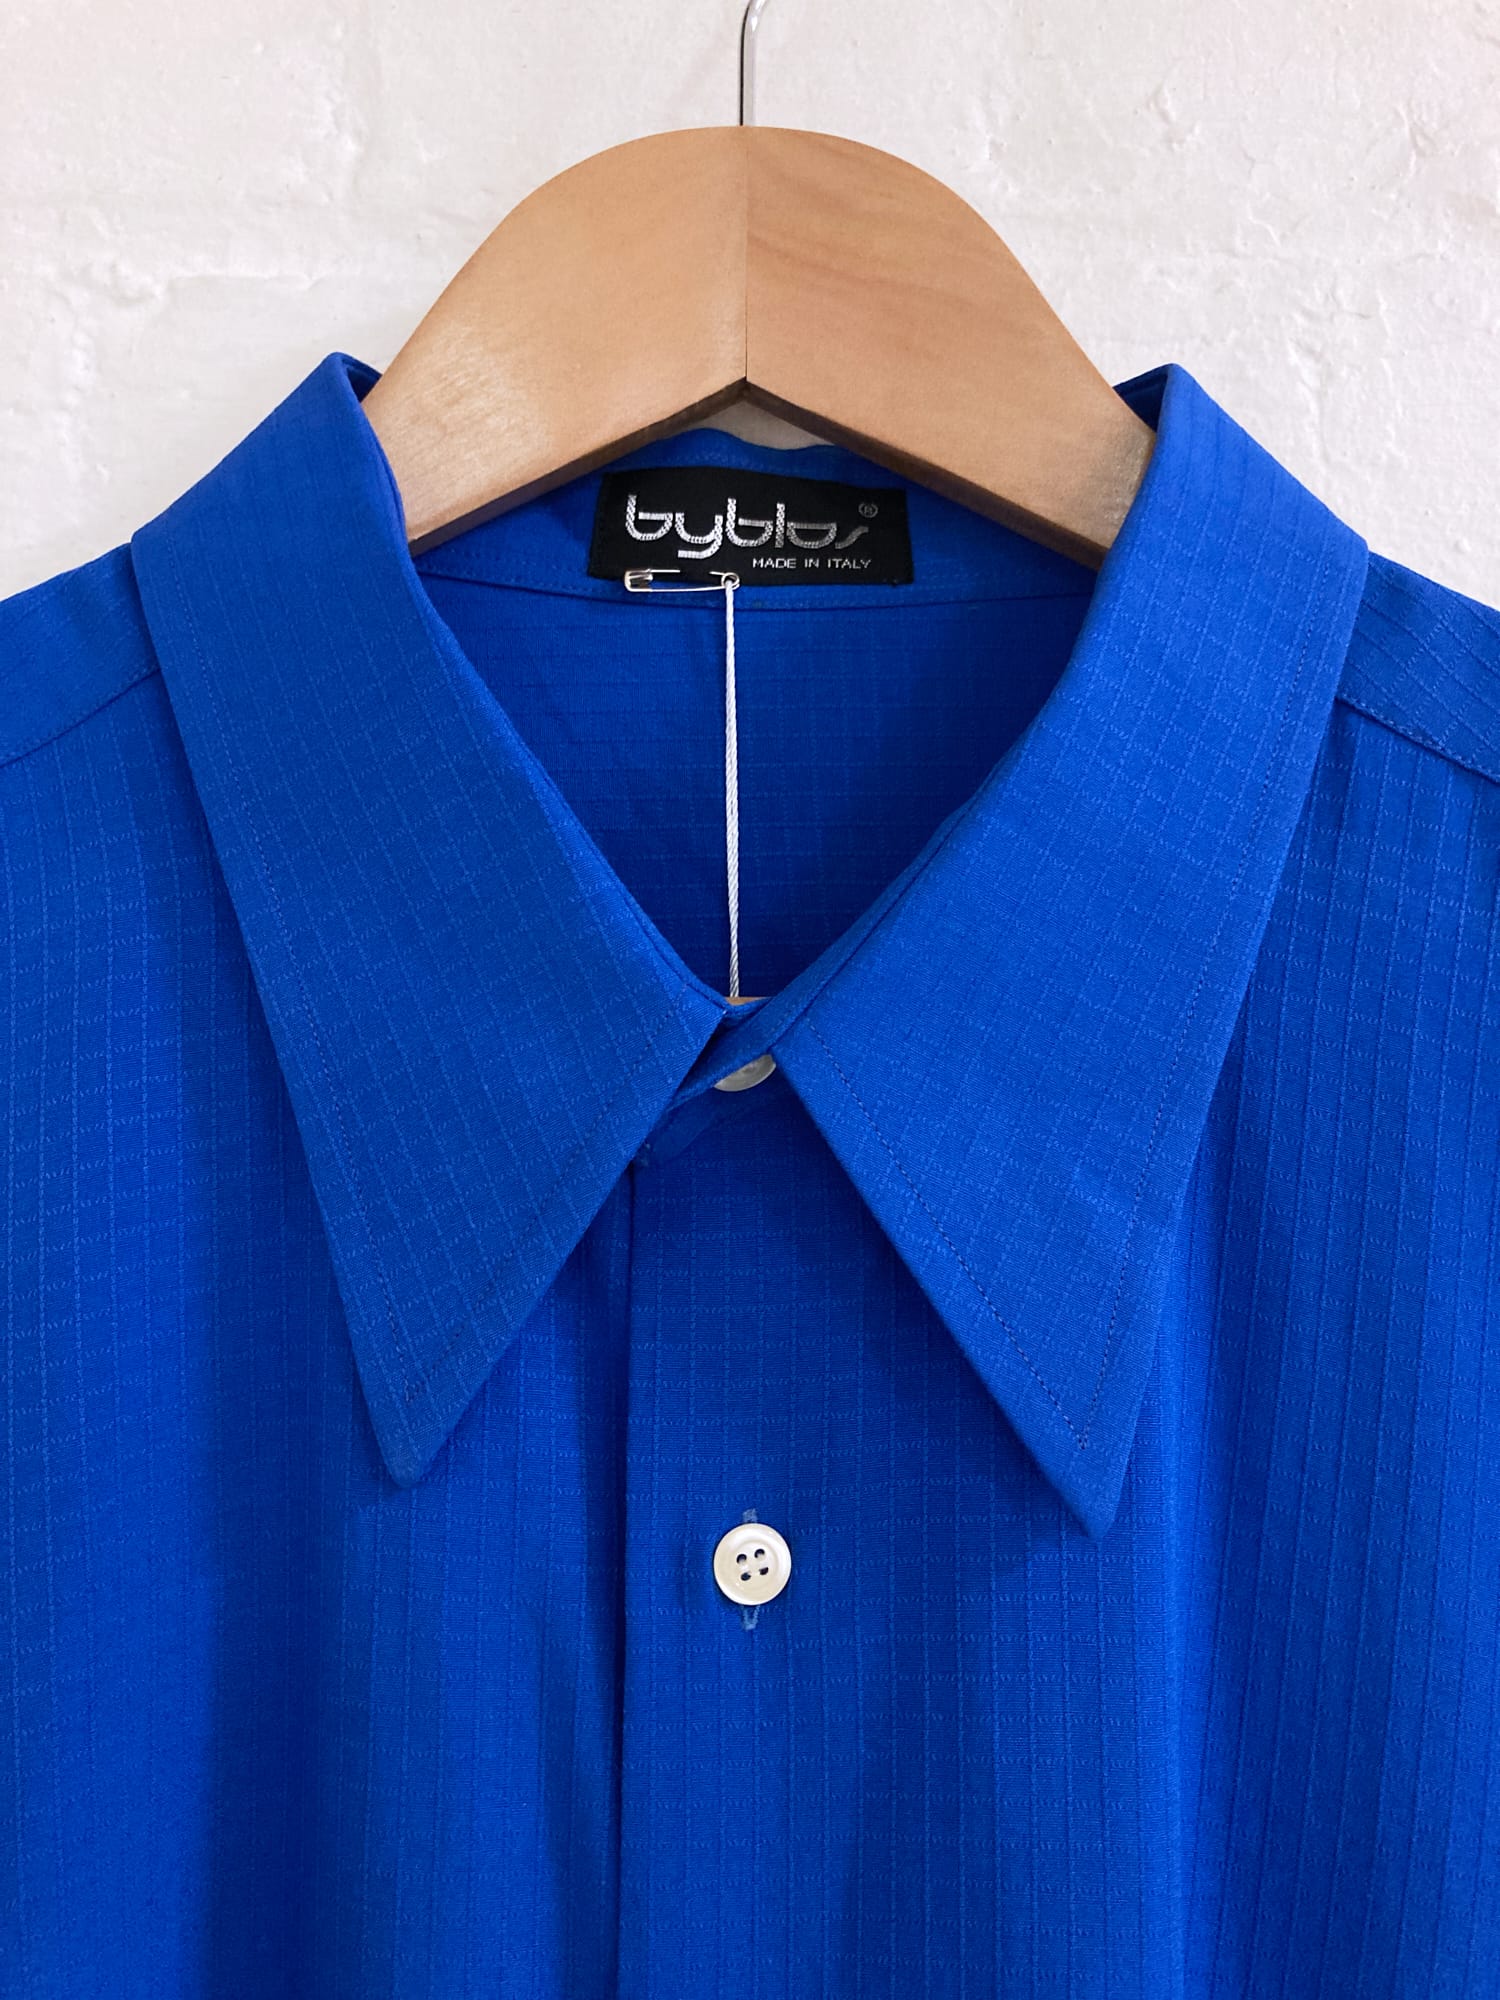 Byblos 1990s blue cotton ripstop long sleeve shirt